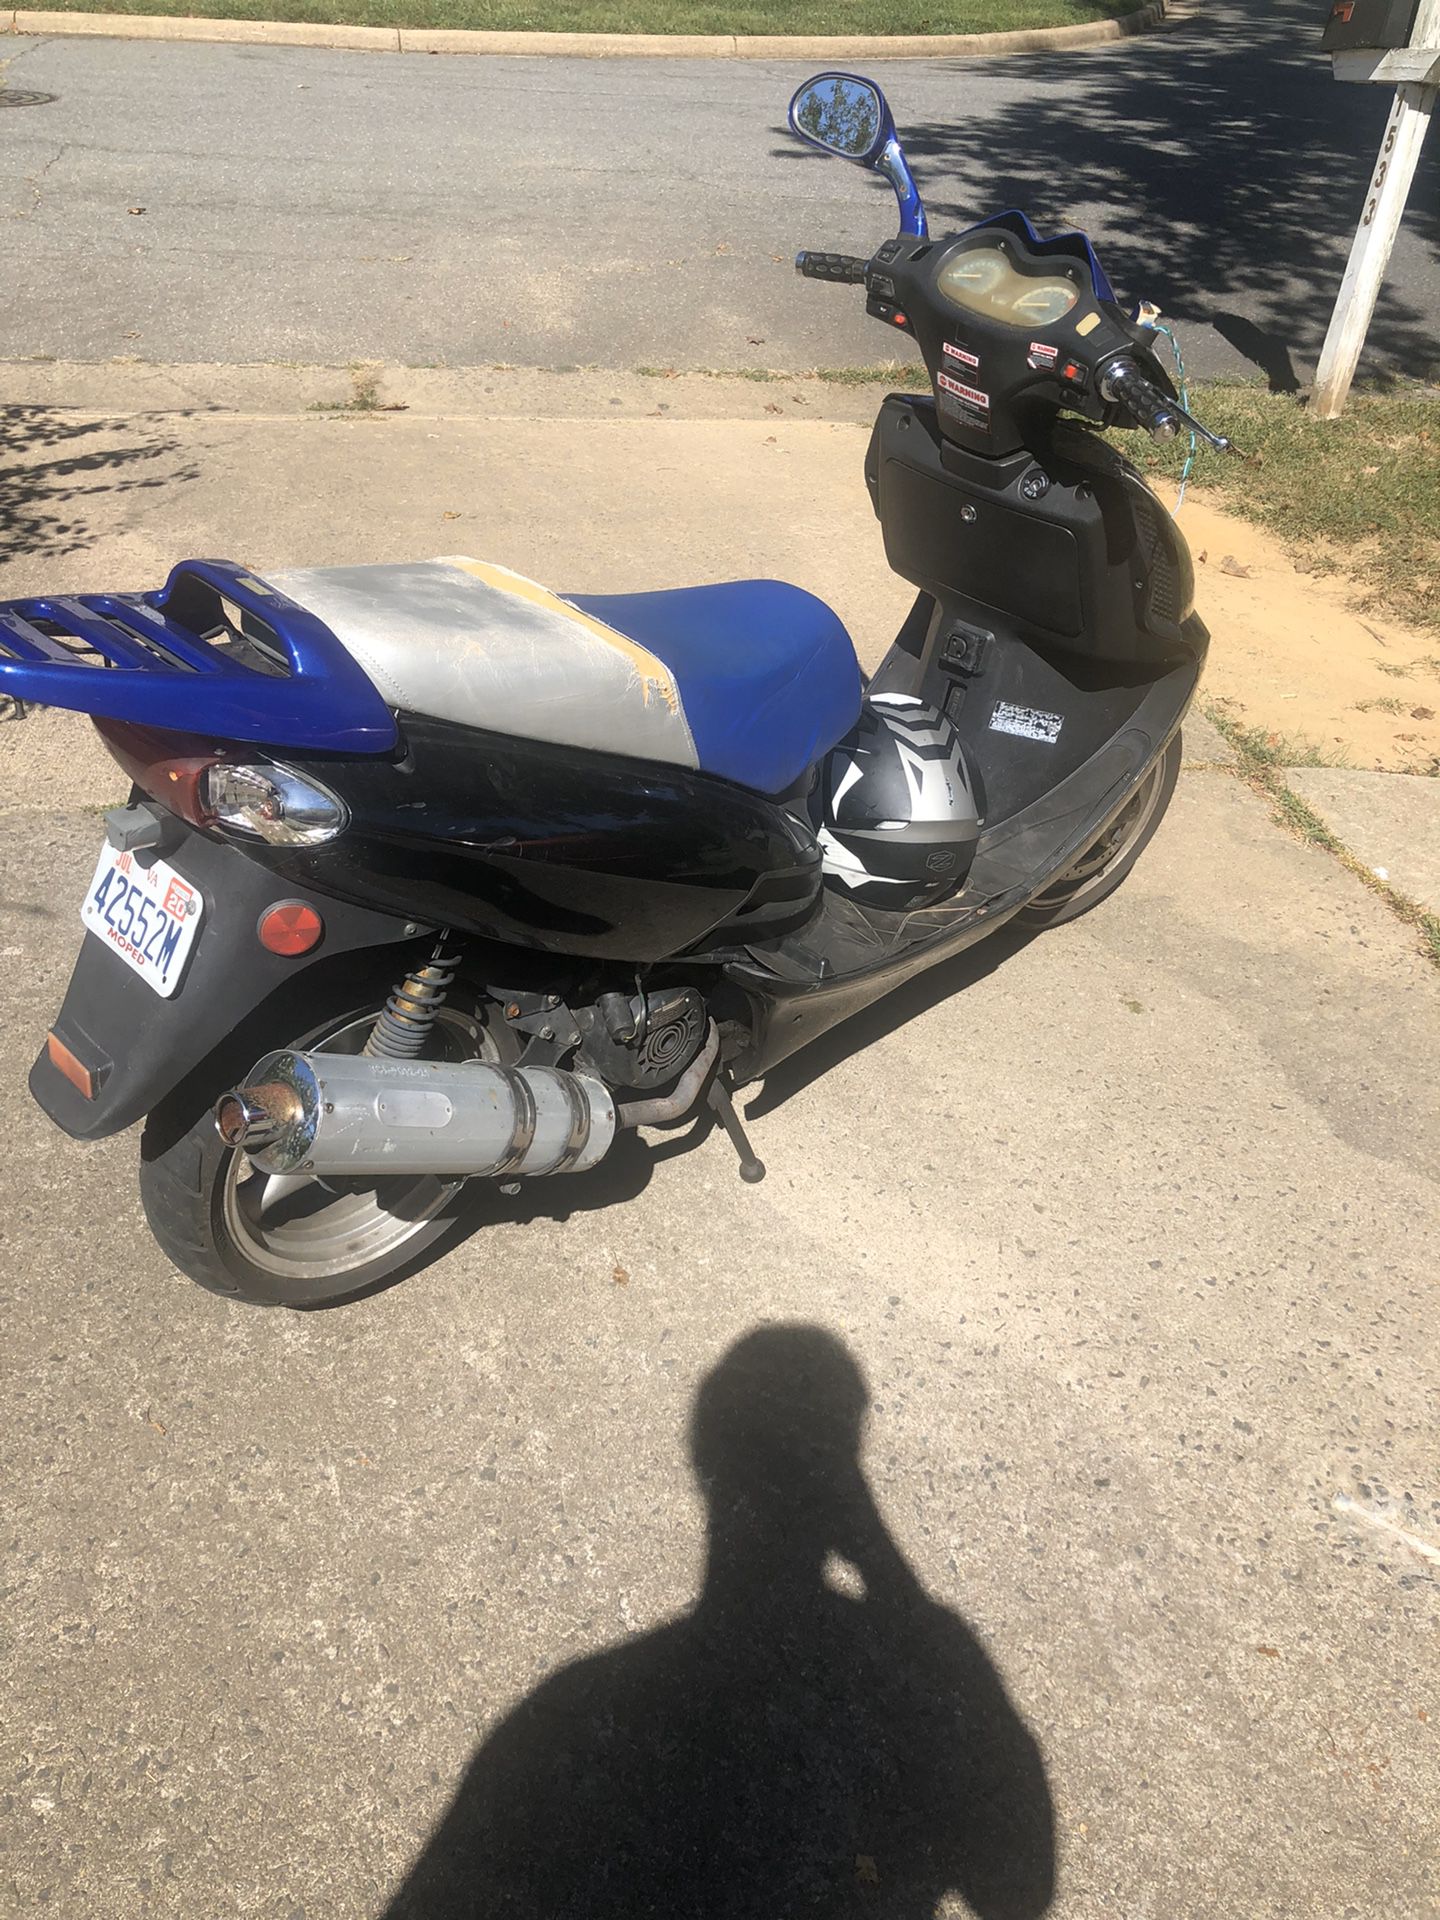 I’m selling a 150cc scooter